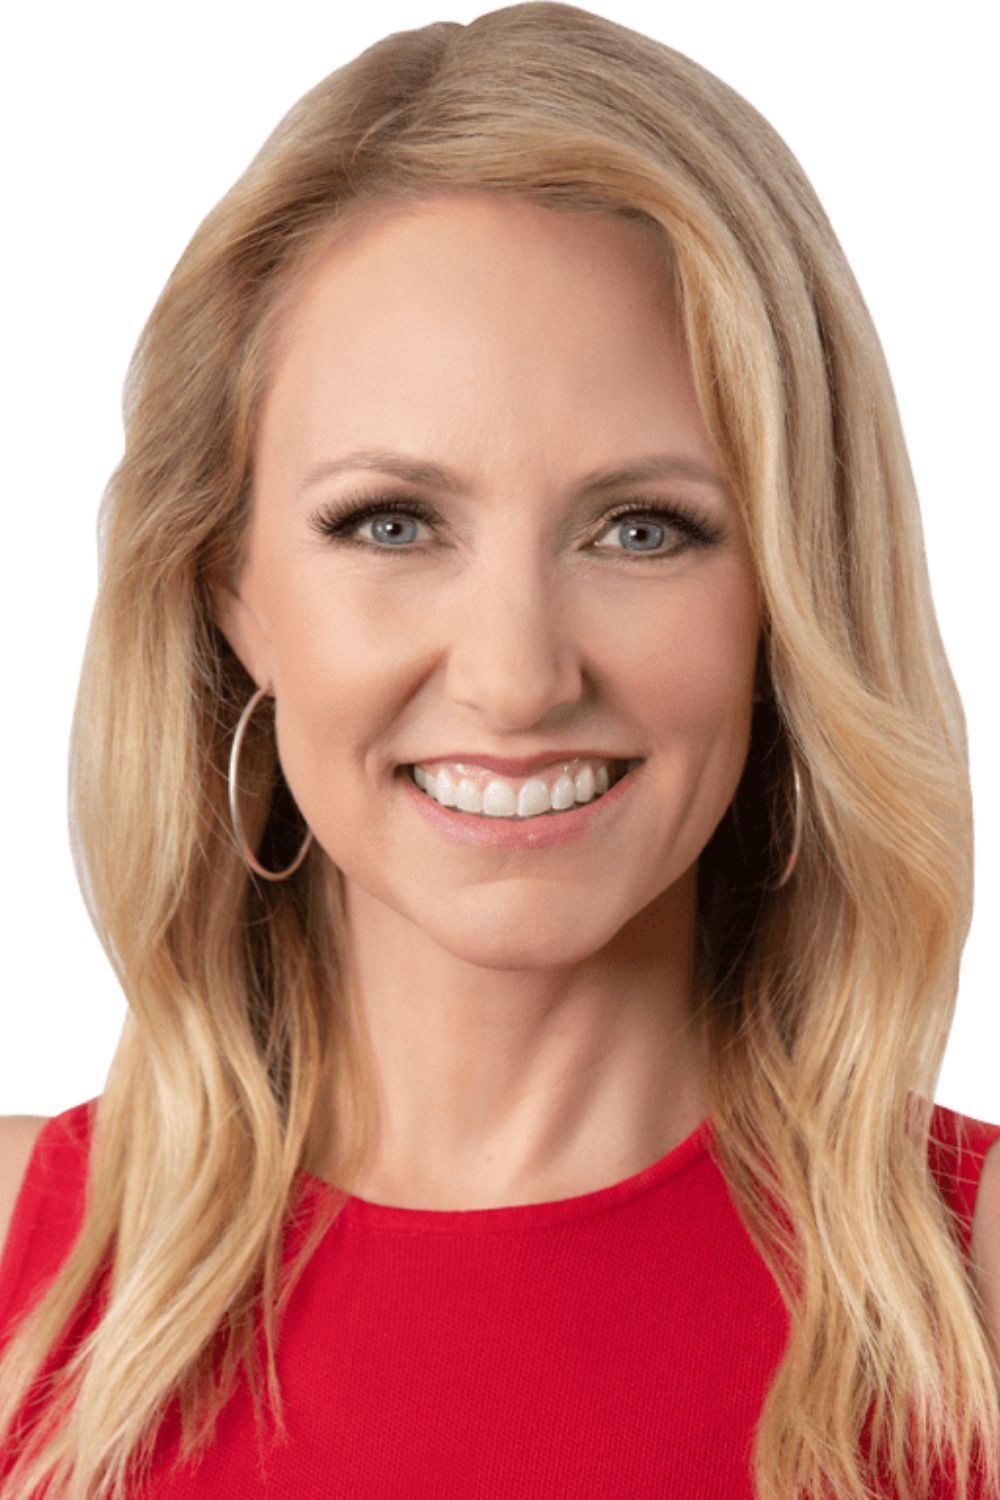 Lindsay Rhodes Is An American Sportscaster, Journalist And Television Personality